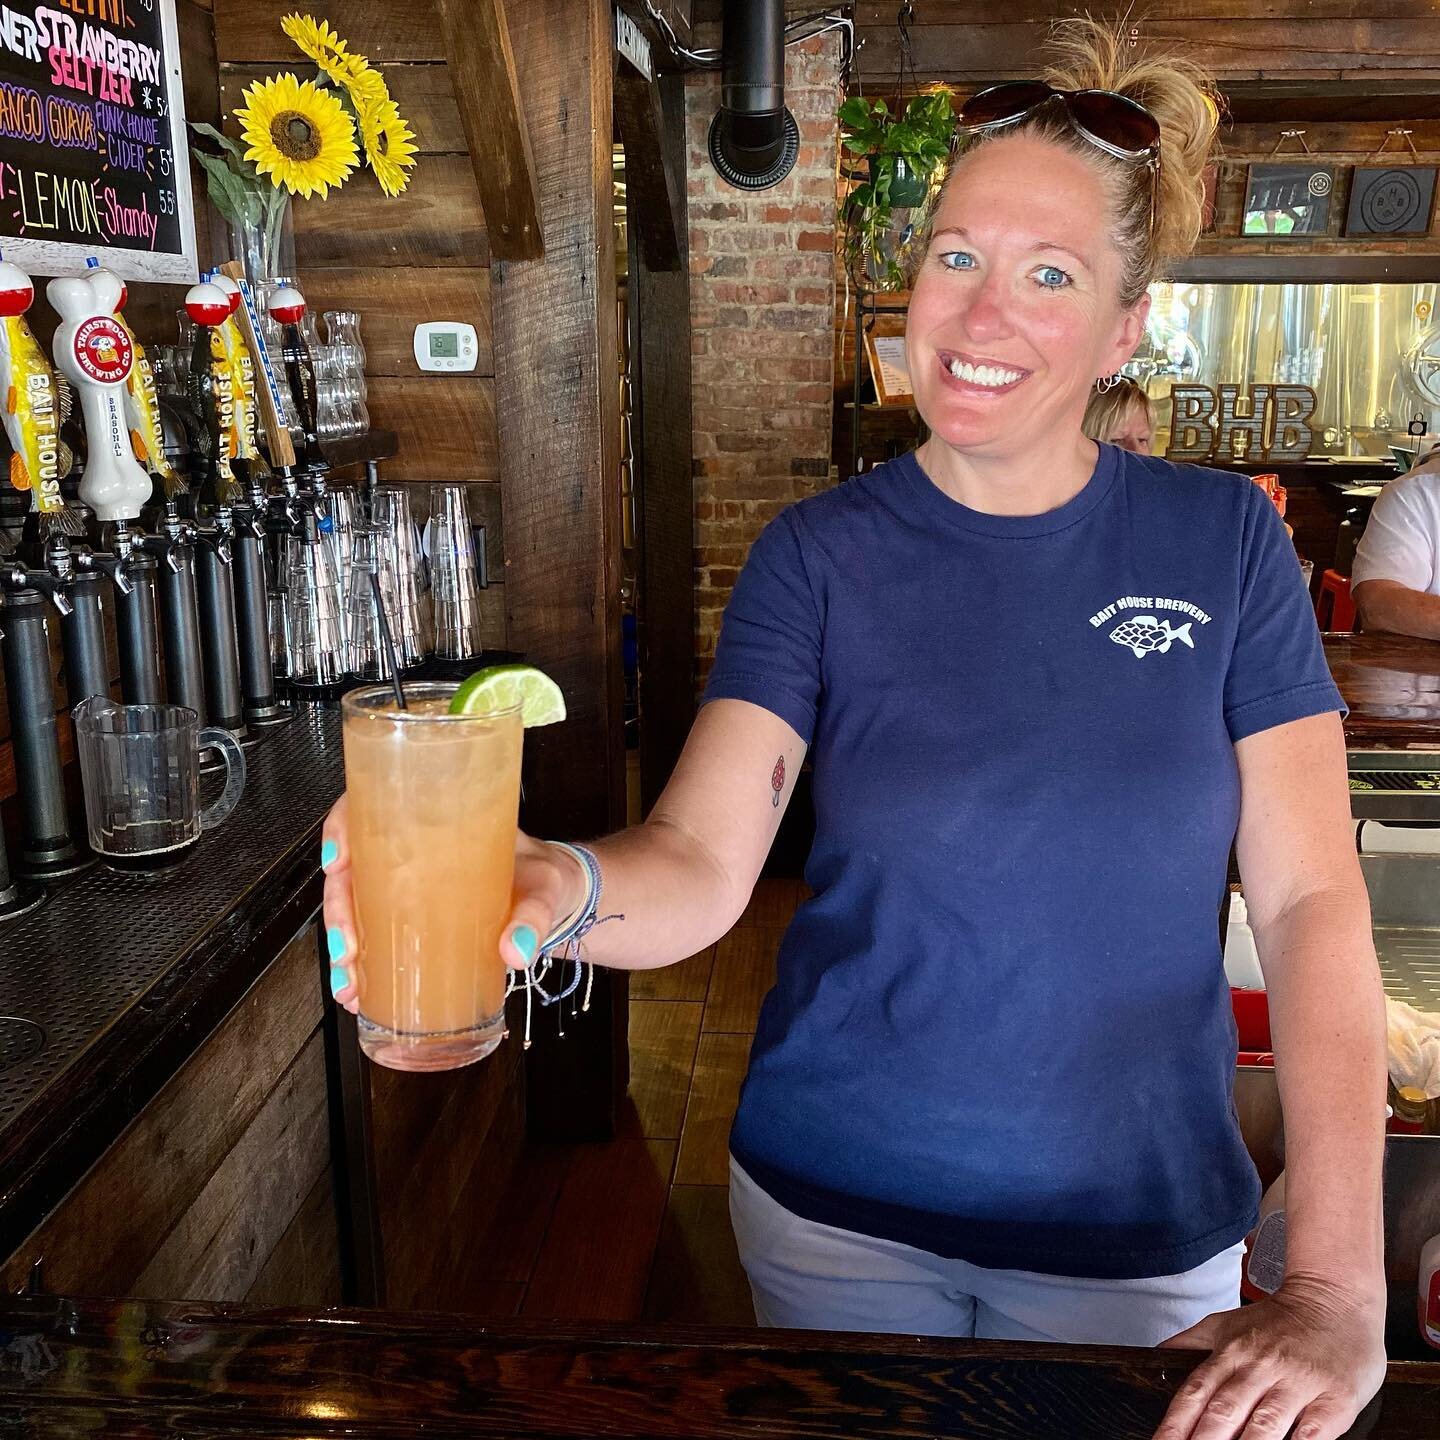 It&rsquo;s a beautiful day for an Erie Paloma on the Patio! 

🎶 Gary Mould from the Kickin&rsquo; Back Band will be playing LIVE in the Beer garden from 6-9 🎶

See you here &amp; come as you are&hellip; 
#hopsfish #nothinfishyaboutit #comeasyouare 